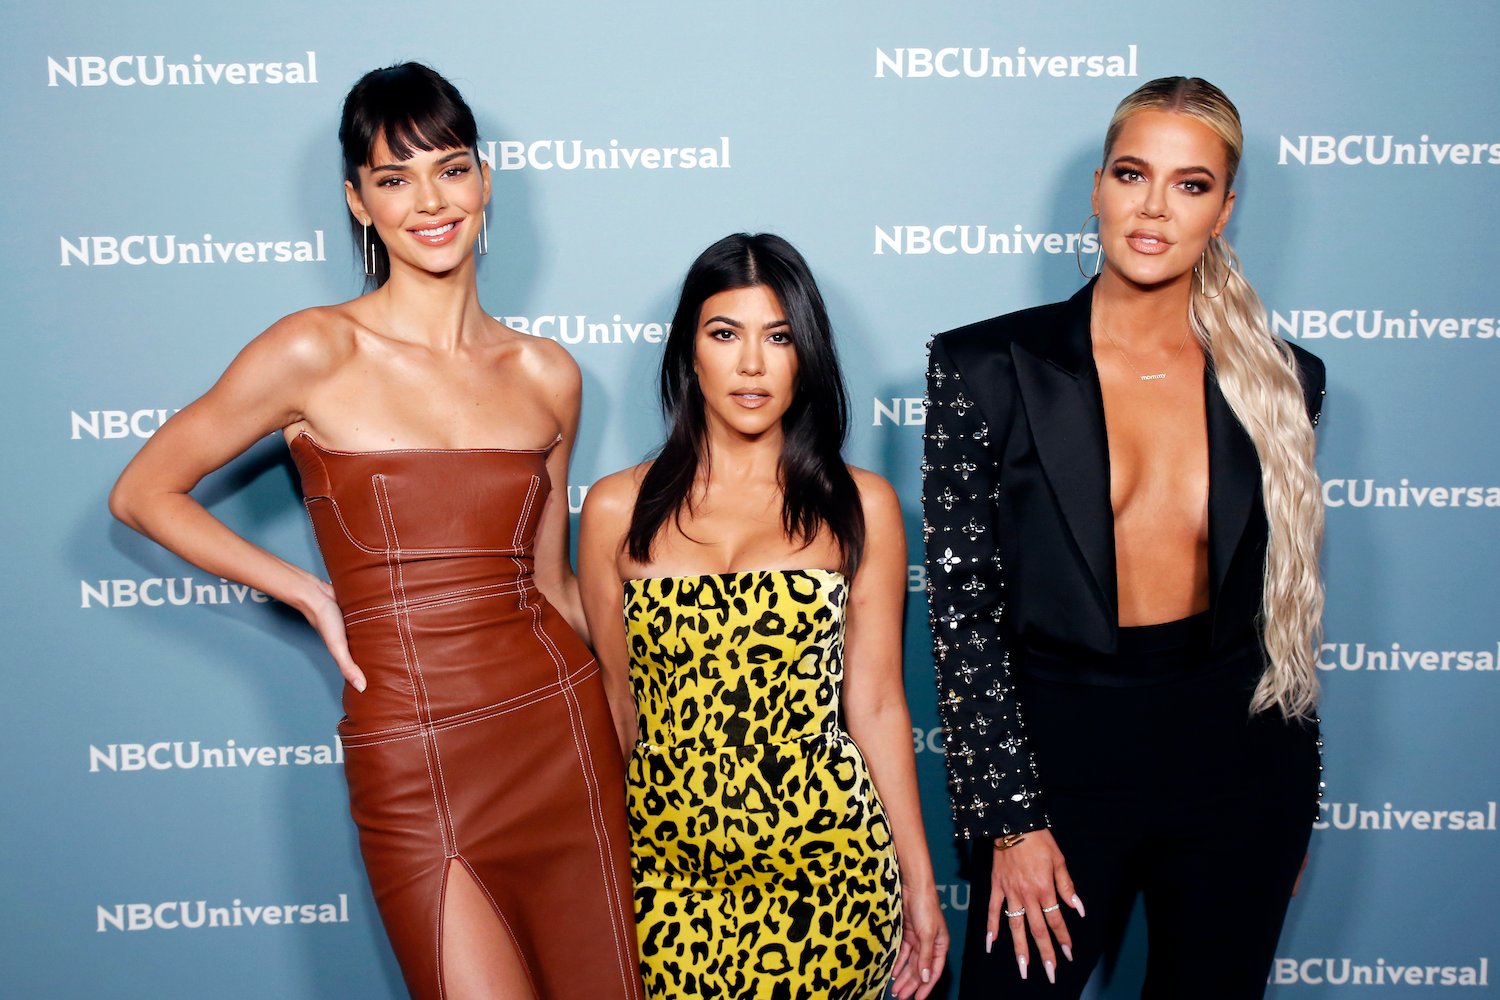 Kendall Jenner, Kourtney Kardashian, and Khloe Kardashian at 2019 NBCUniversal Upfront in New York City for Keeping up with The Kardashians